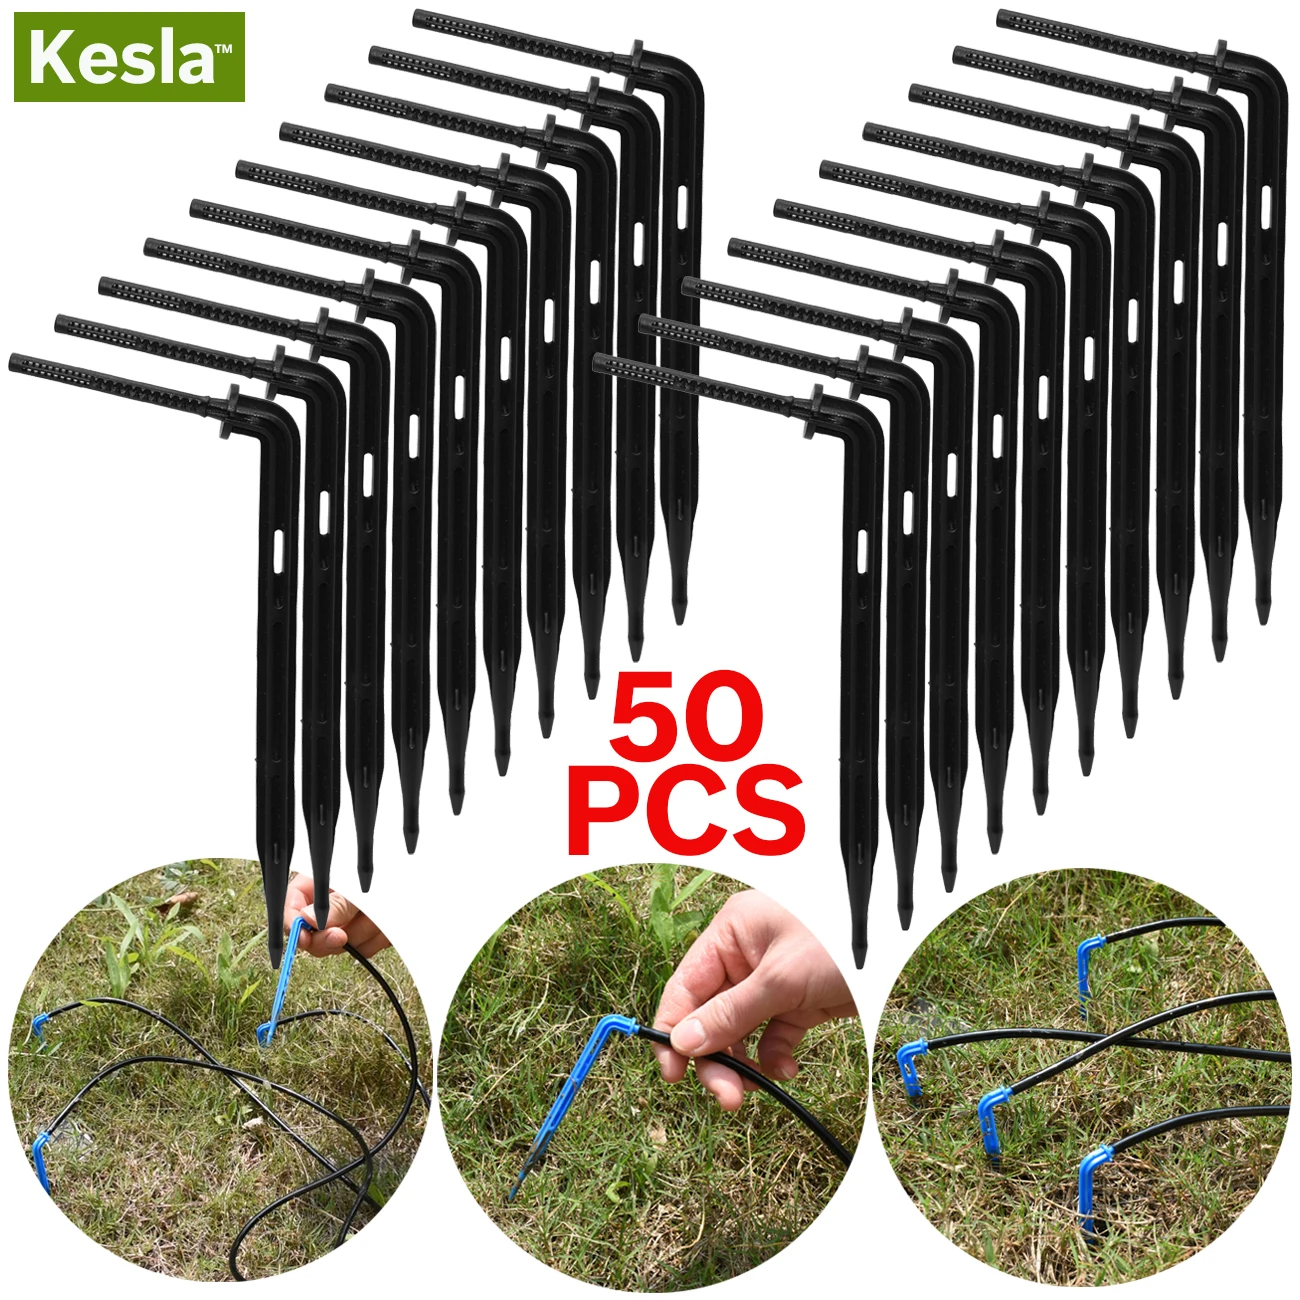 H37c9540e0a444c3aab882c9168cc52e69 KESLA 50PCS Bend Arrow Dripper Micro Drip Irrigation Kit Emitters for 3/5mm Hose Garden Watering Saving Micro Dripper Greenhouse